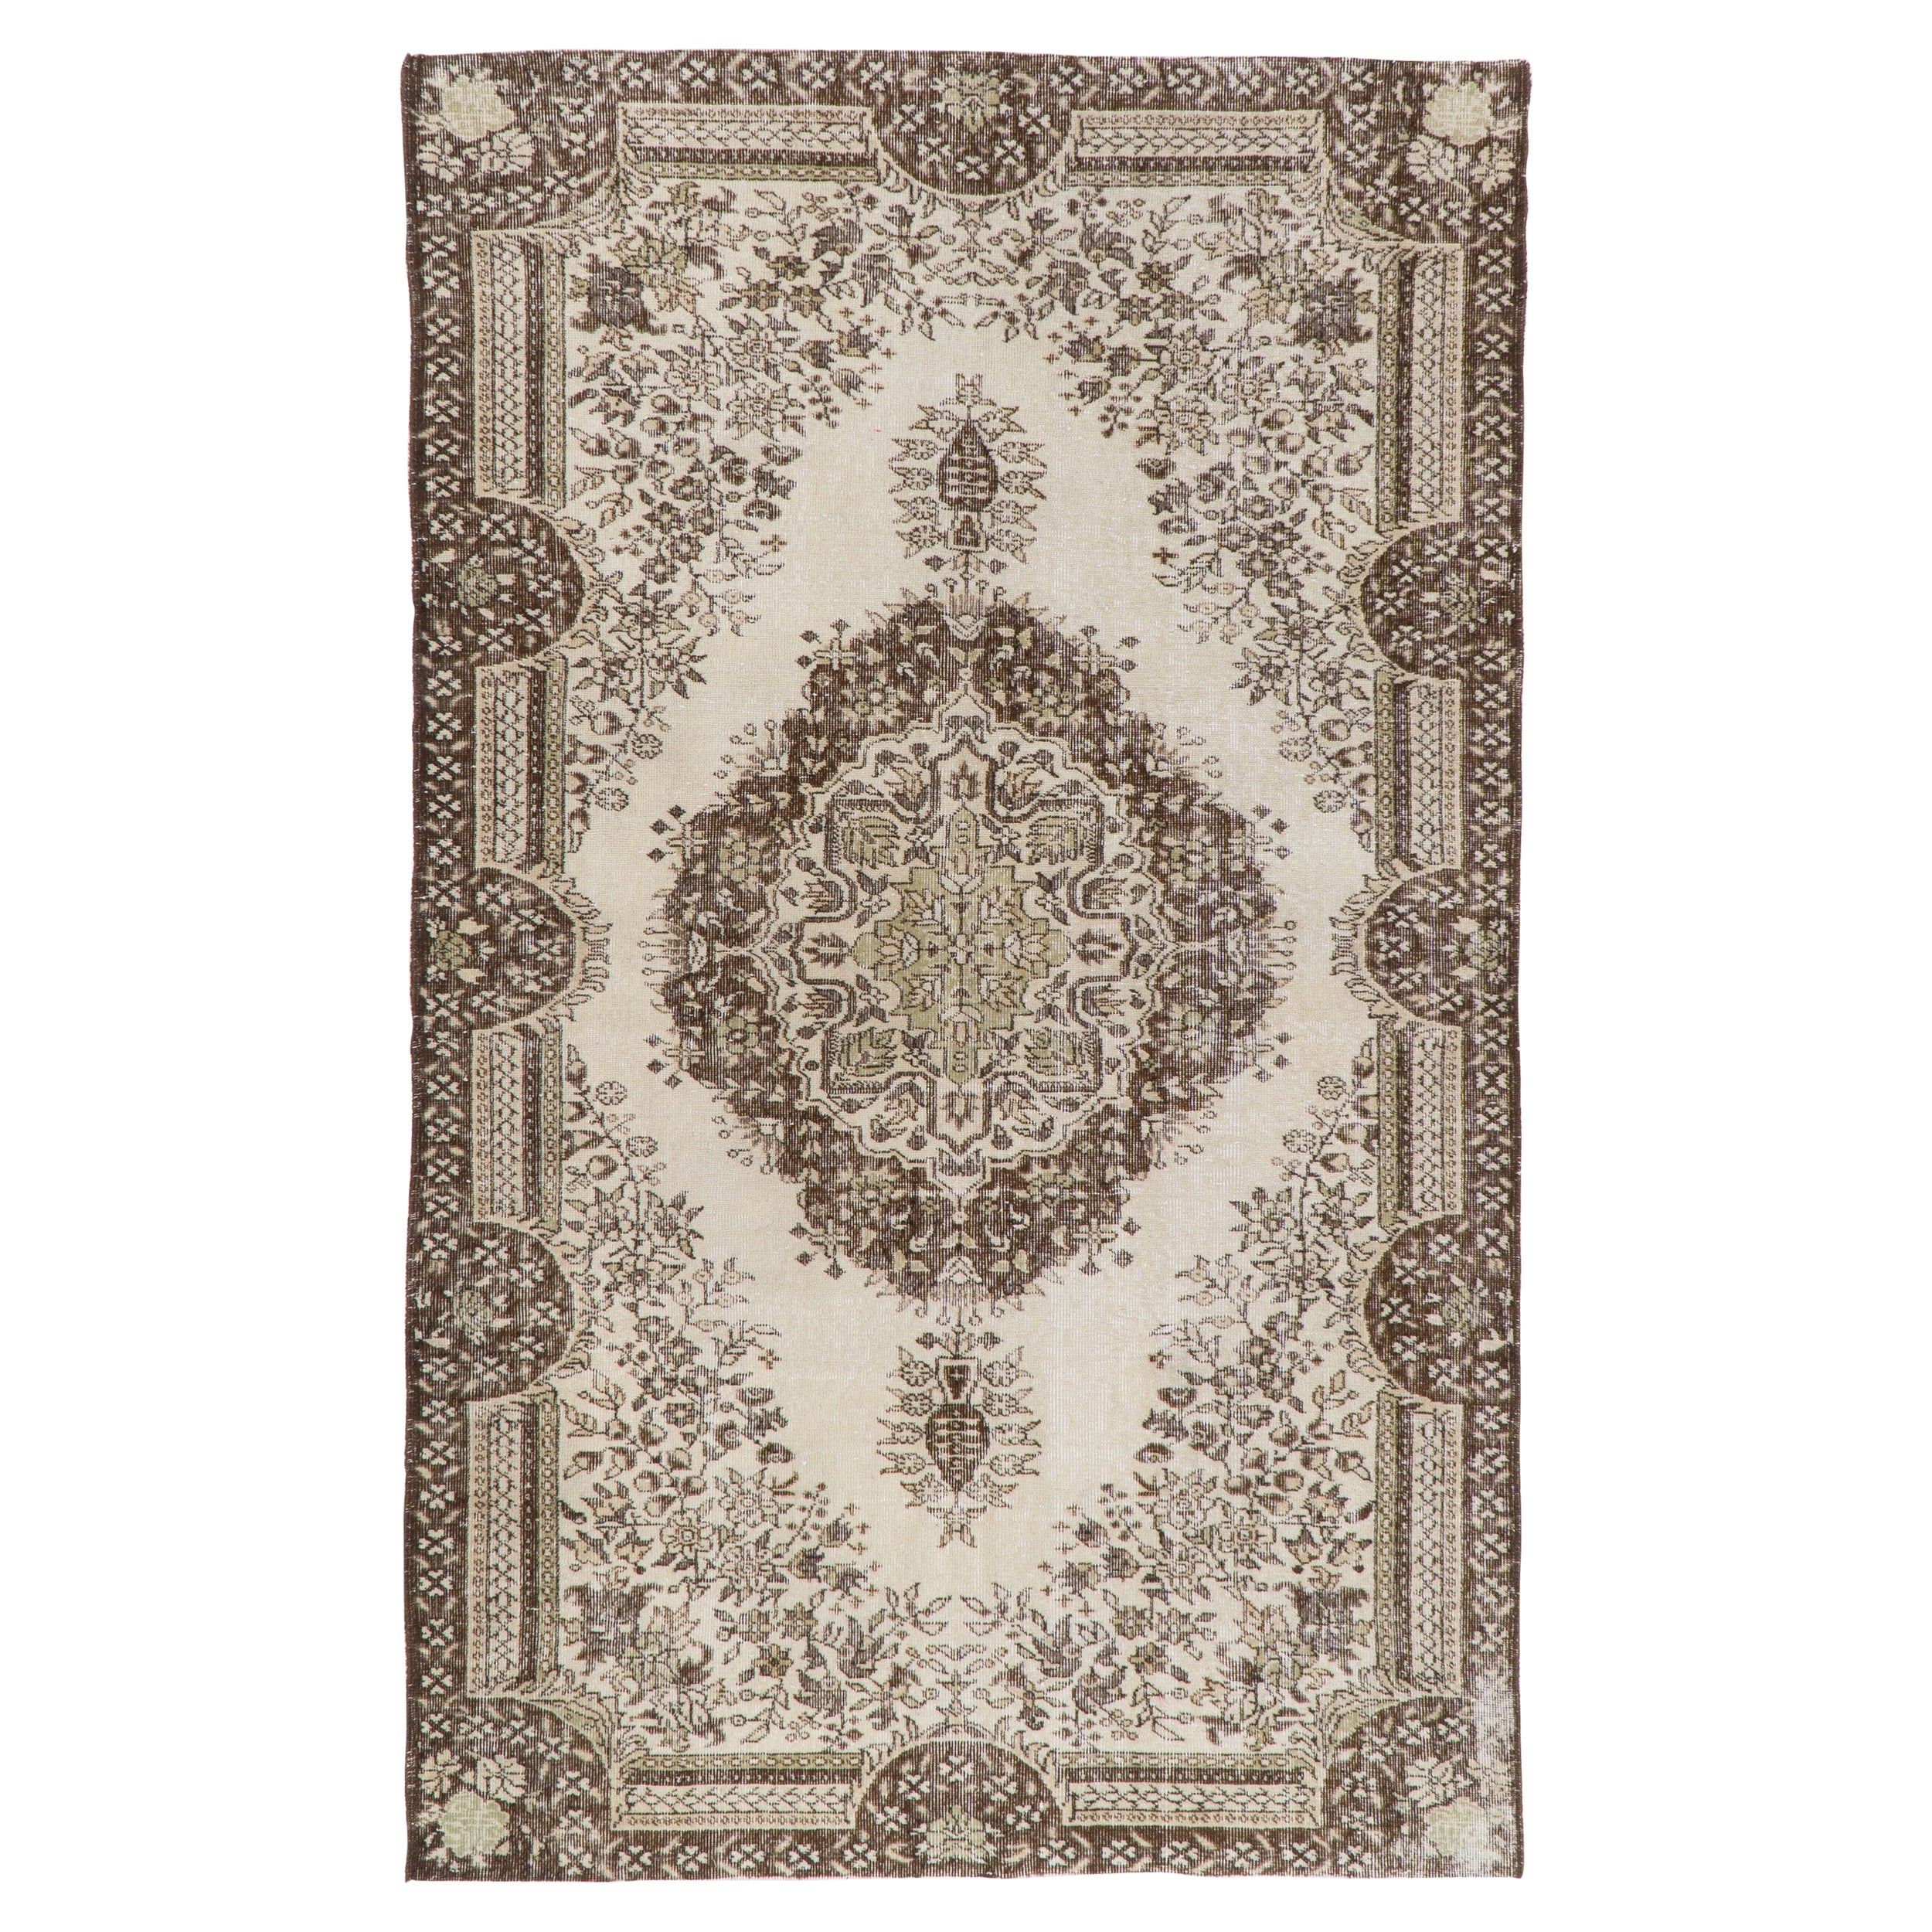 5.5x9 Ft Vintage Antique Washed Handmade Turkish Wool Rug in Neutral Colors For Sale